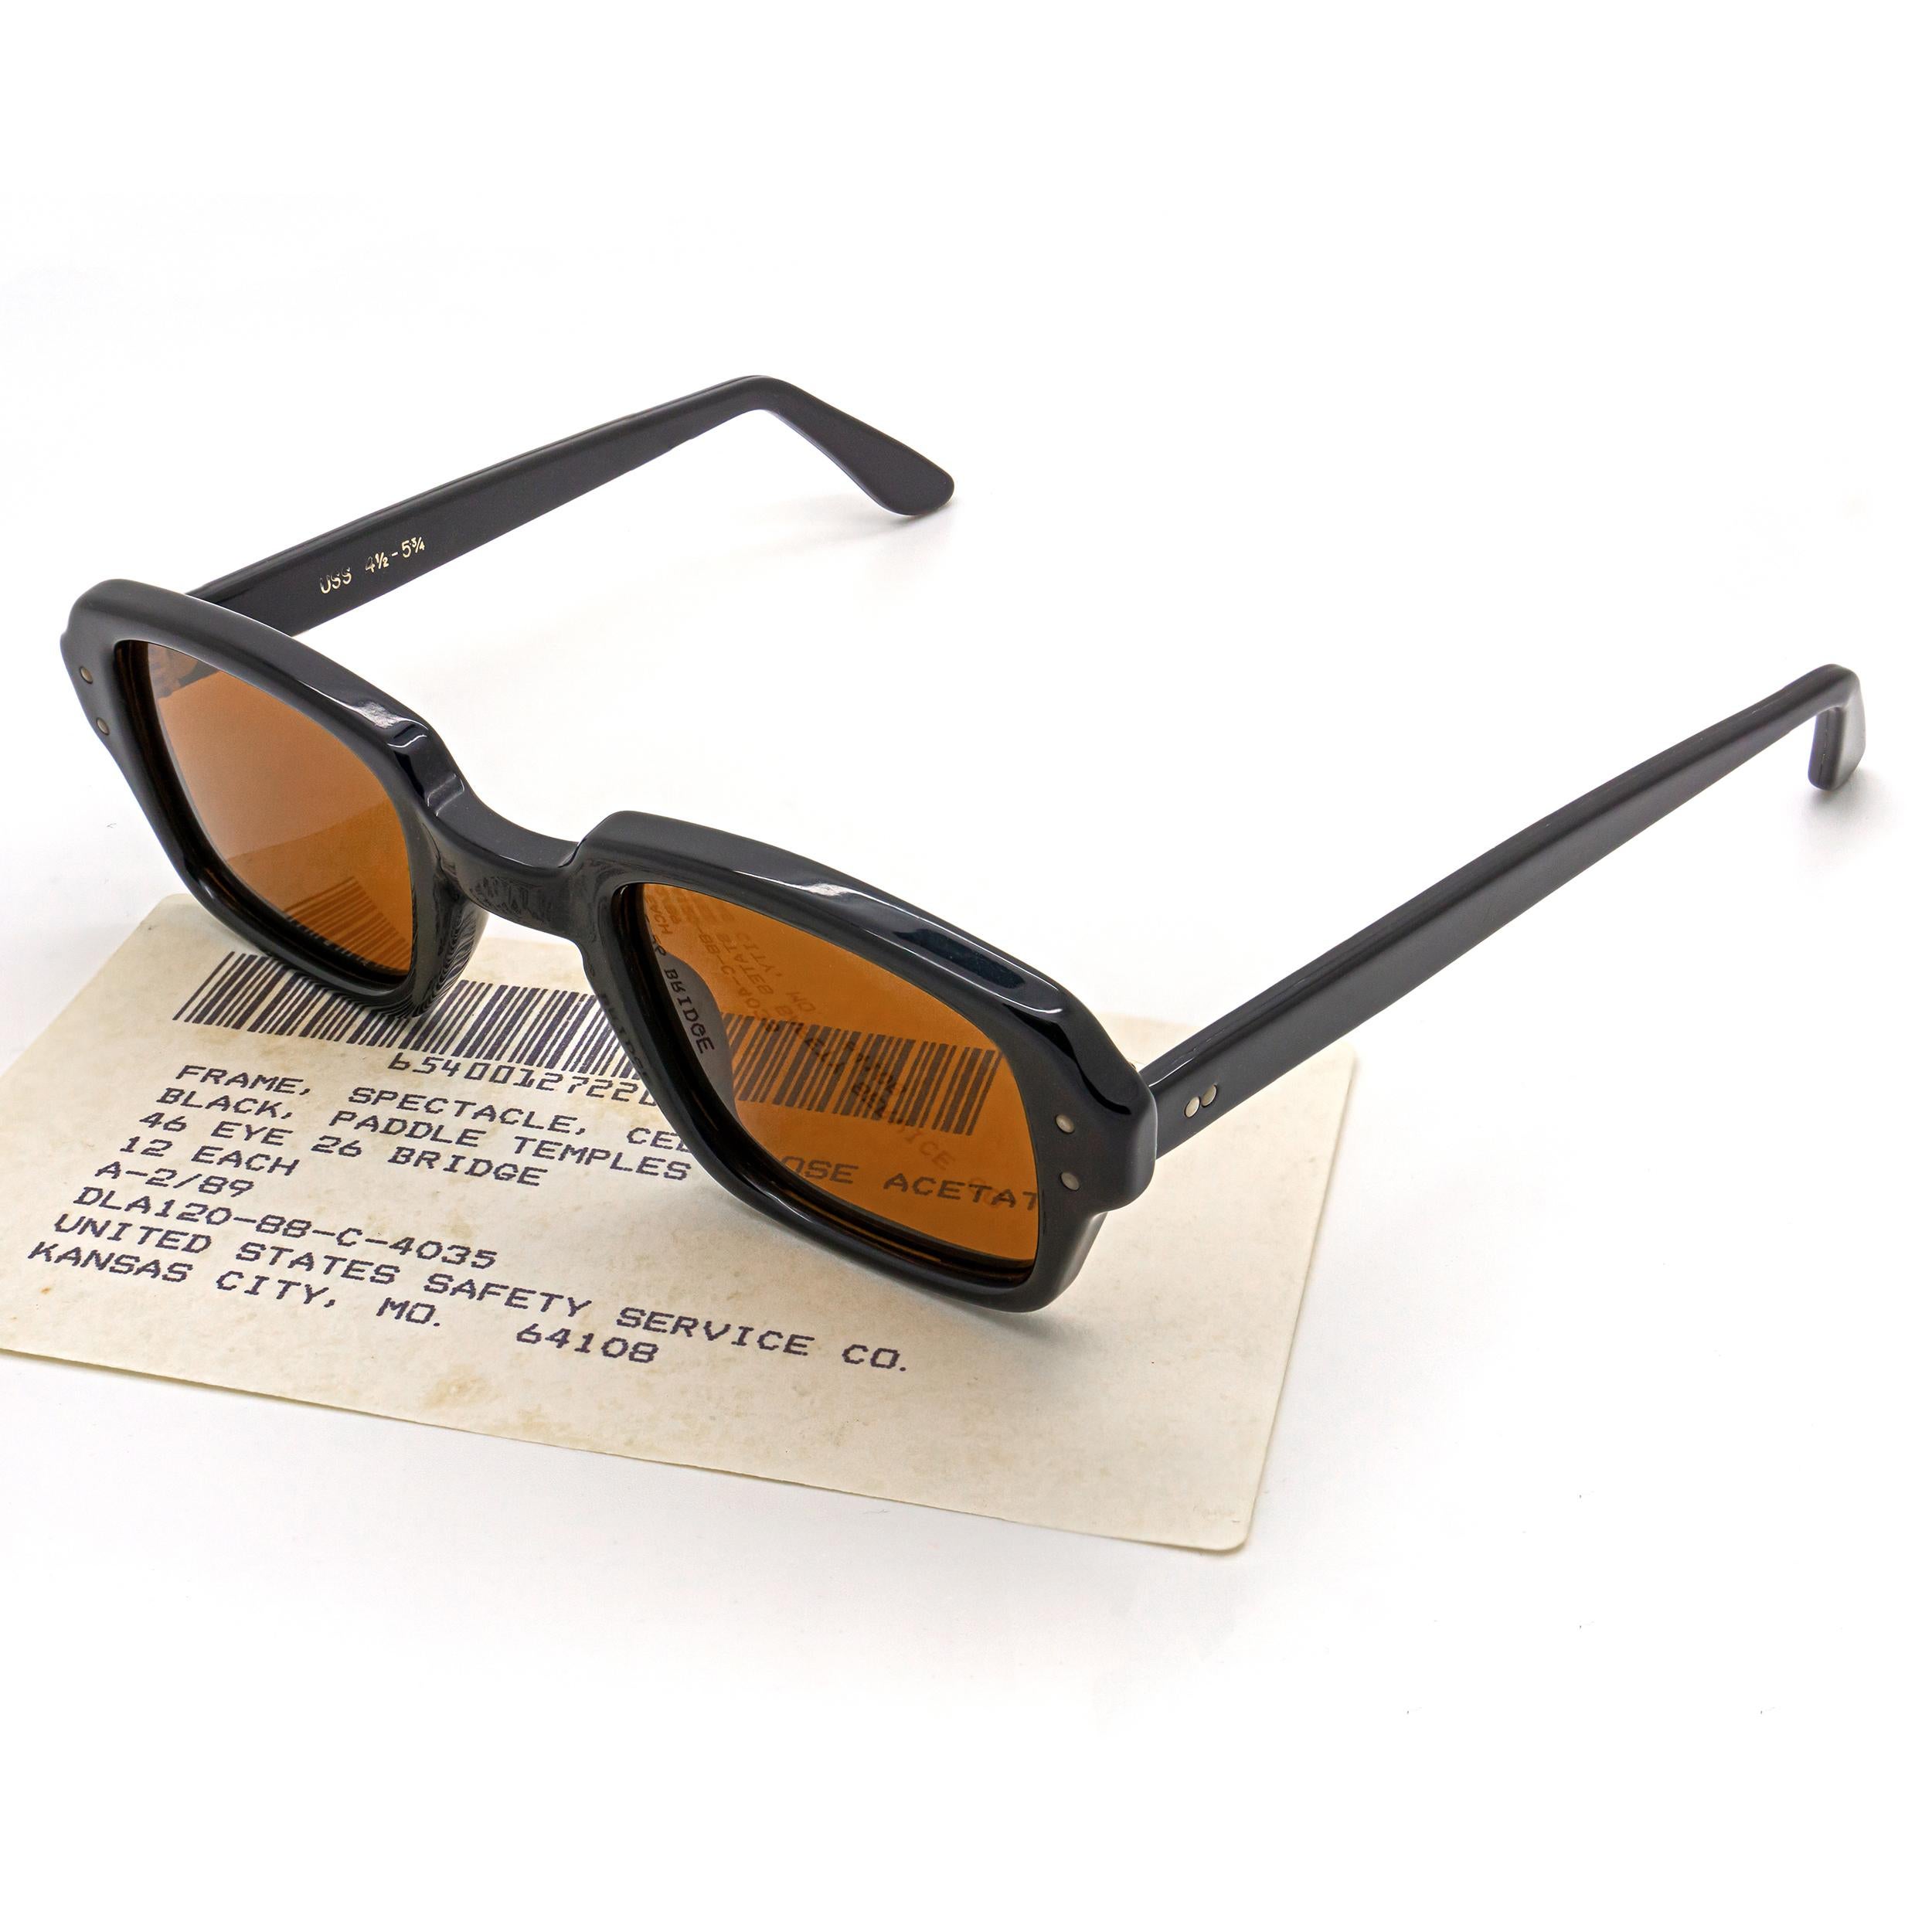 Us Military Vintage Sunglasses Made In U S A Famous Bcg Brown Polarized Lenses For Sale At